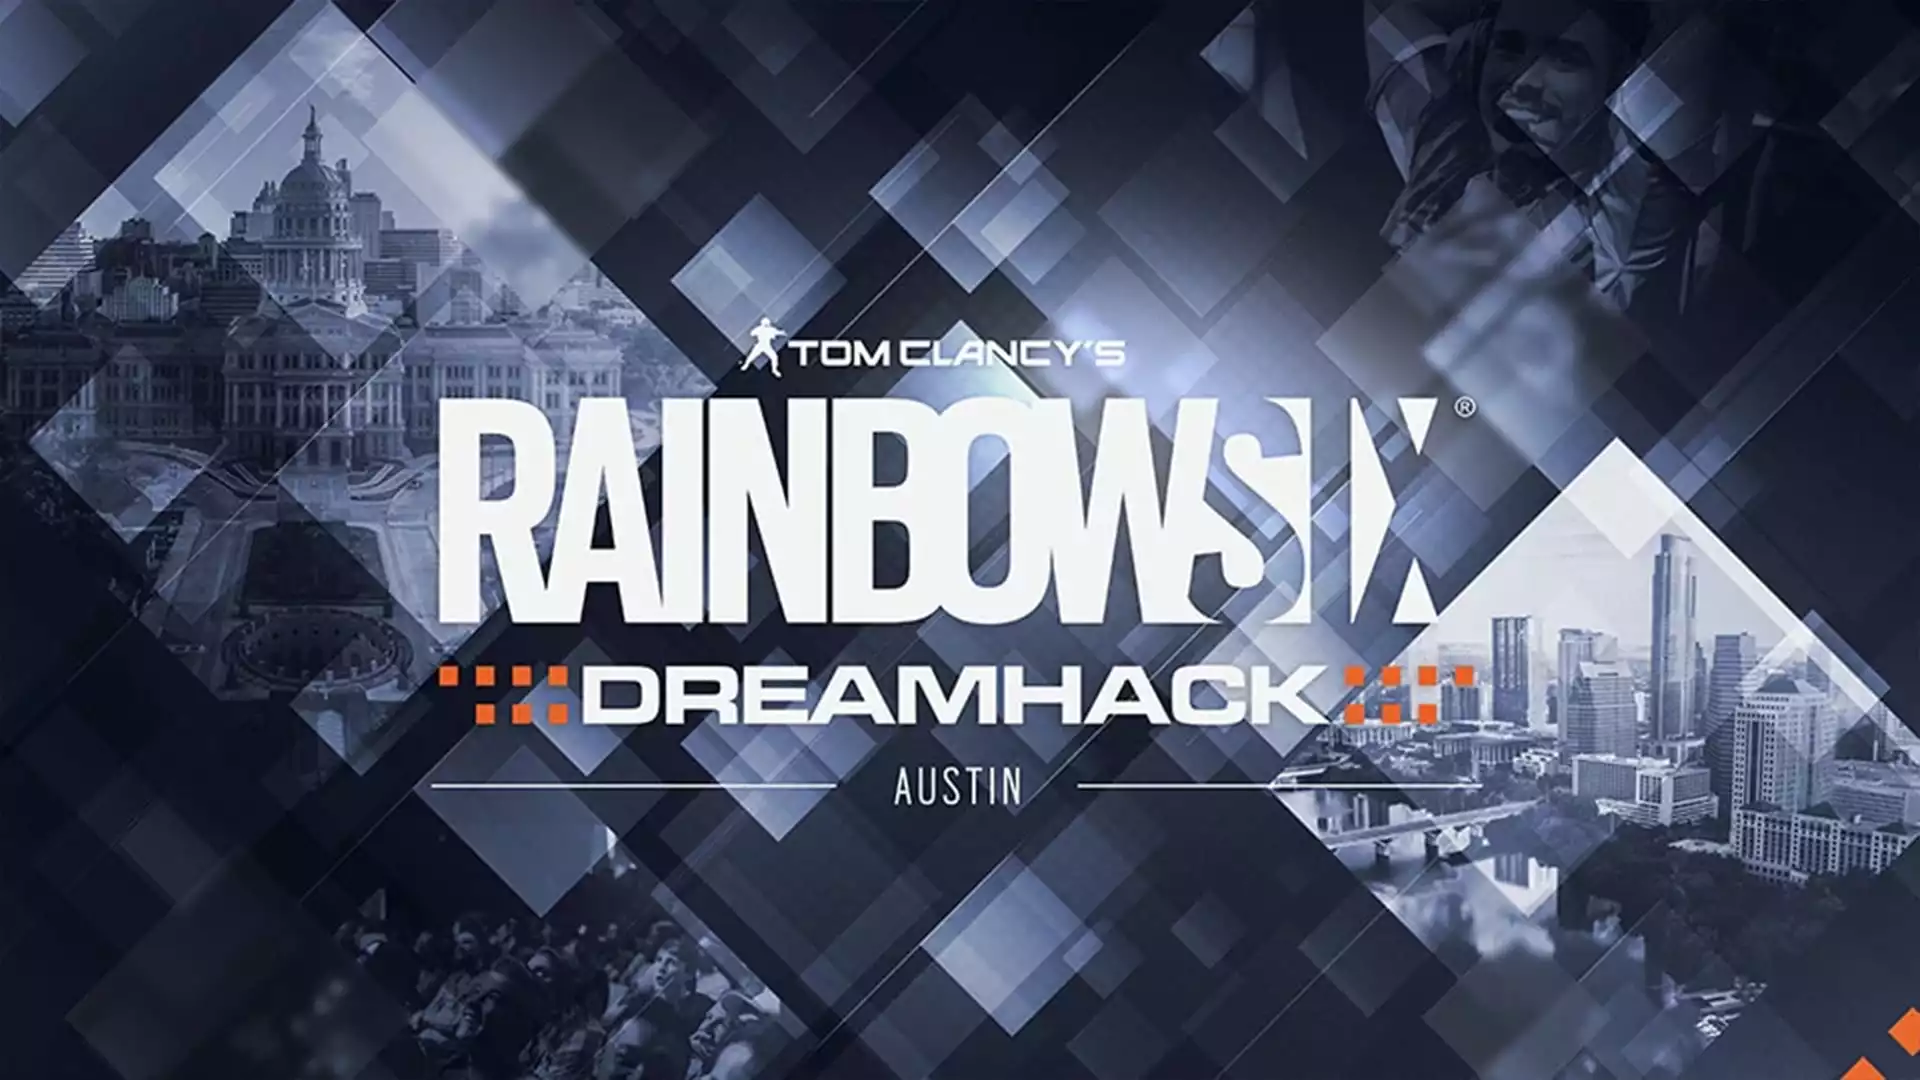 At DreamHack and in the livestream